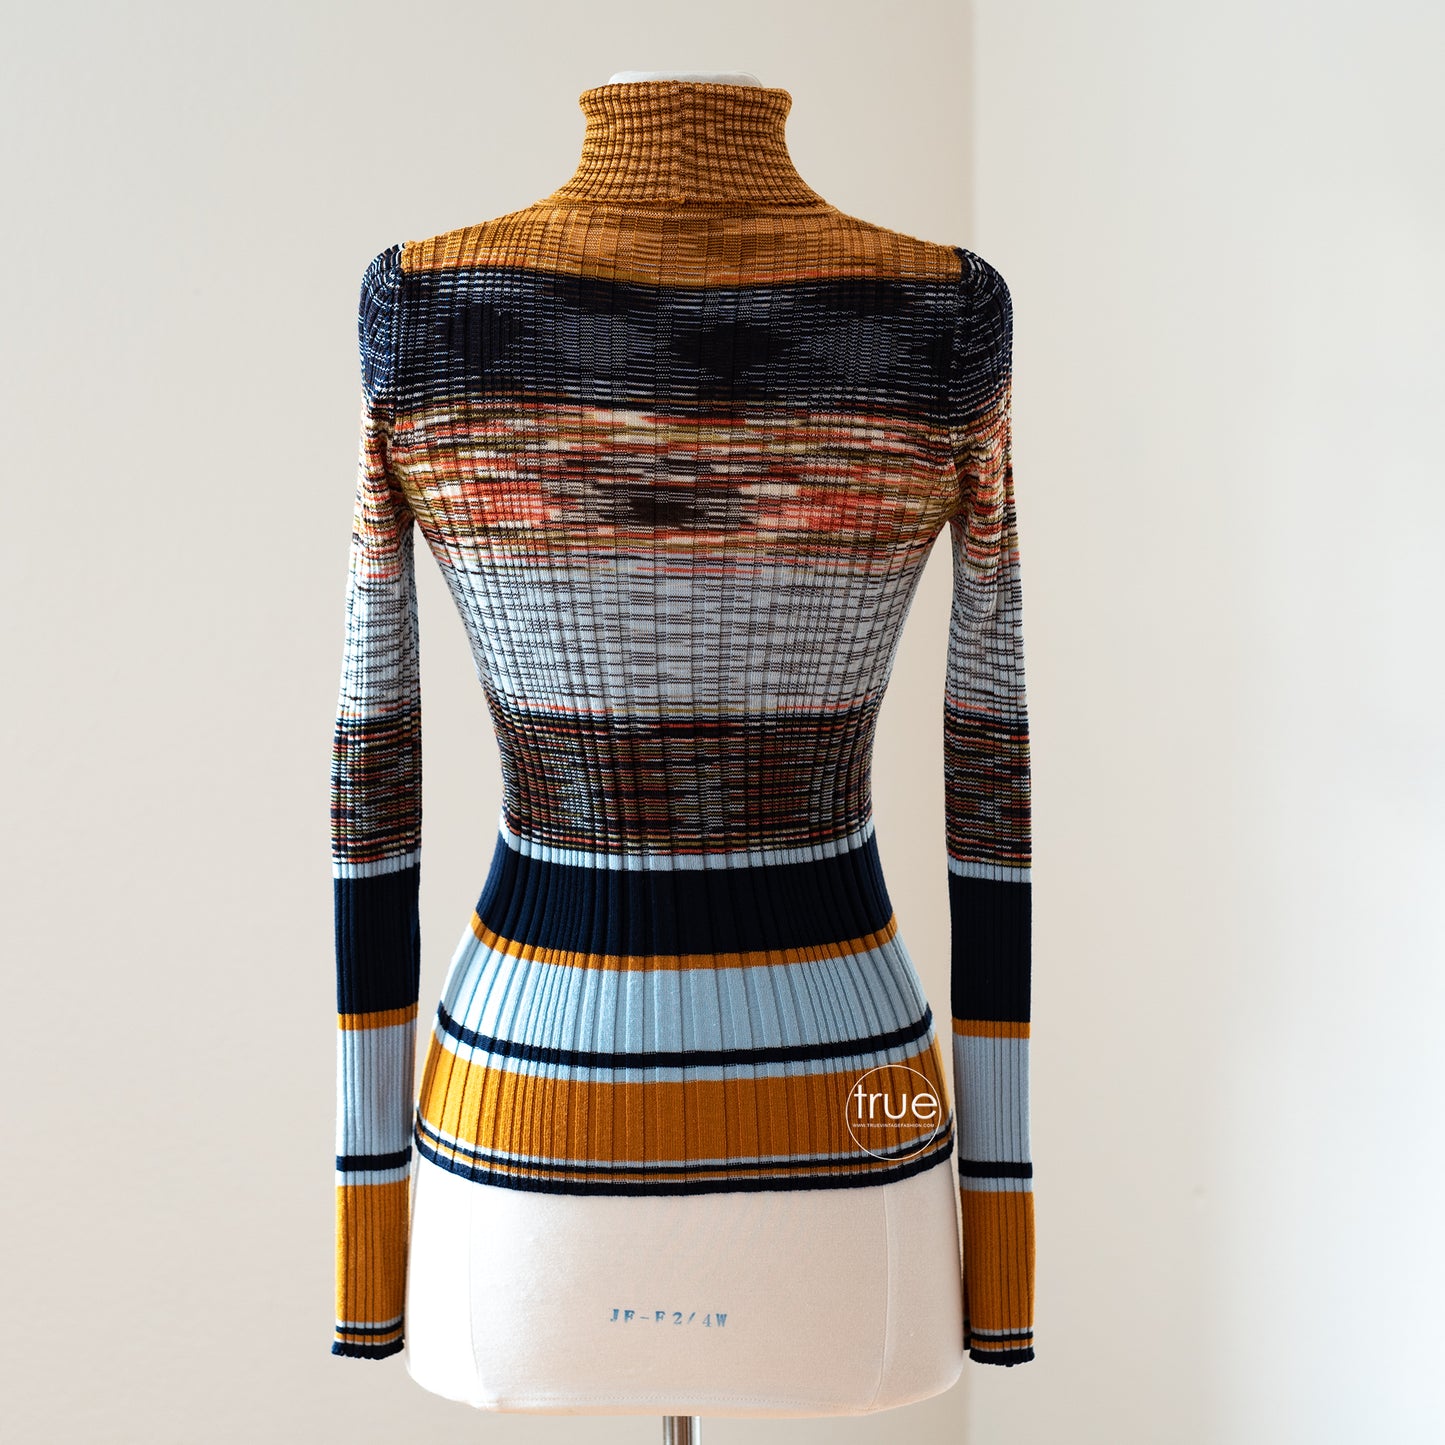 vintage 1970's MISSONI sweater ...classic space-dyed missoni turtleneck sweater